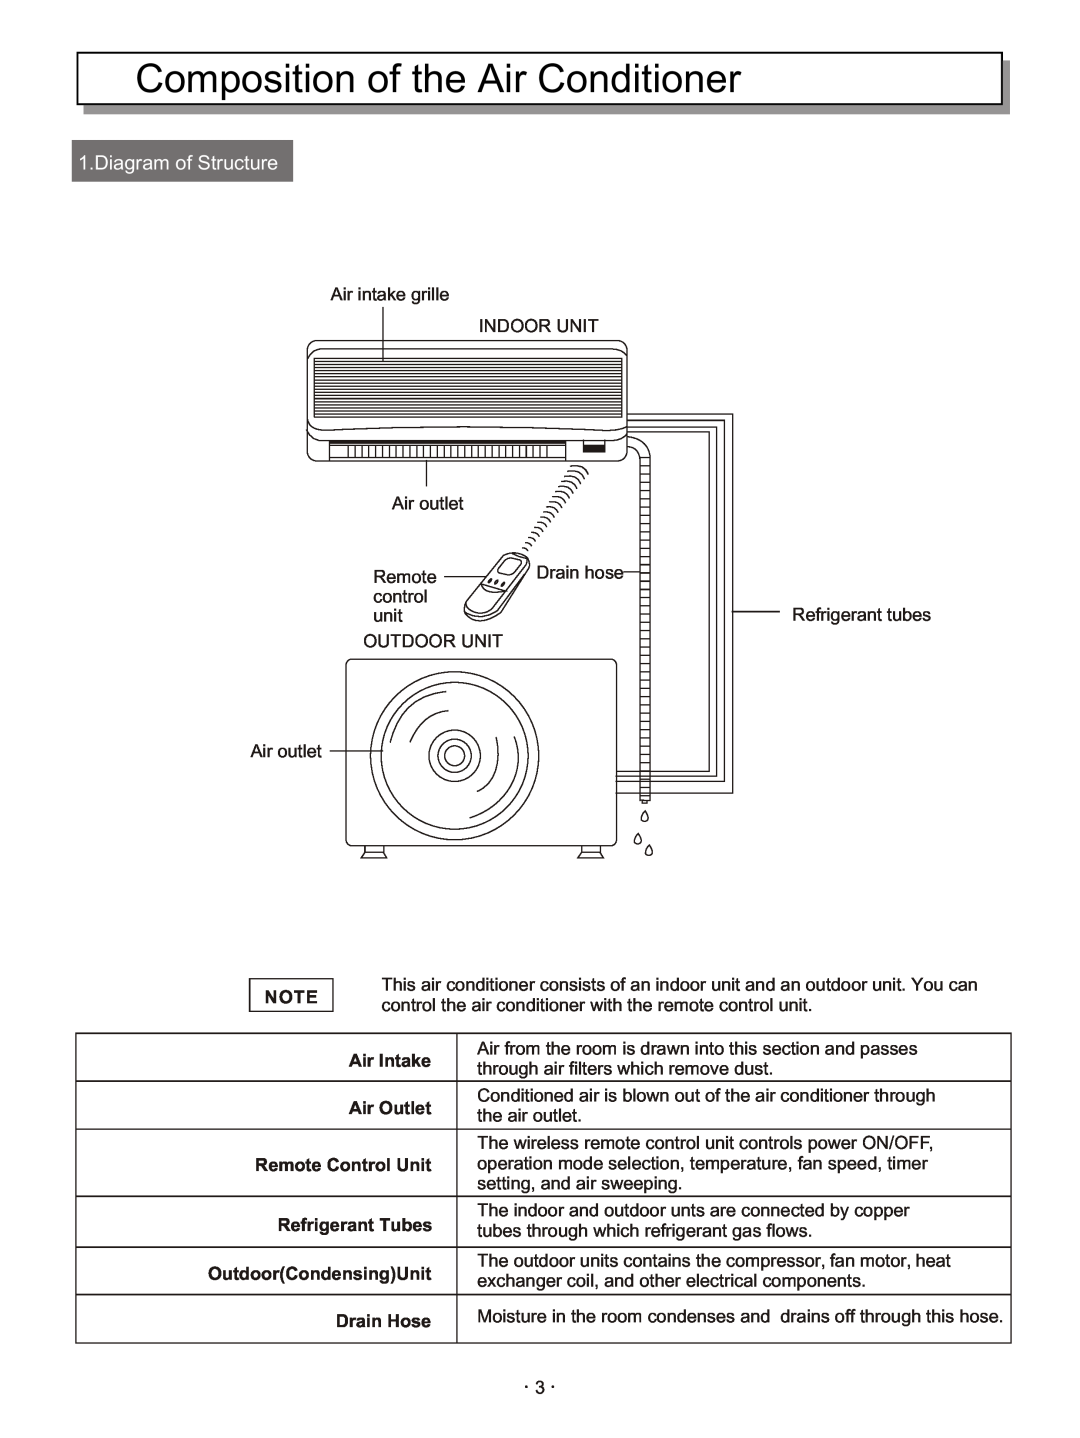 Hisense Group KFR 3201GWE, KFR 33GWE, KFR 28GWE, KFR 2101GWE Composition of the Air Conditioner, Diagram of Structure 